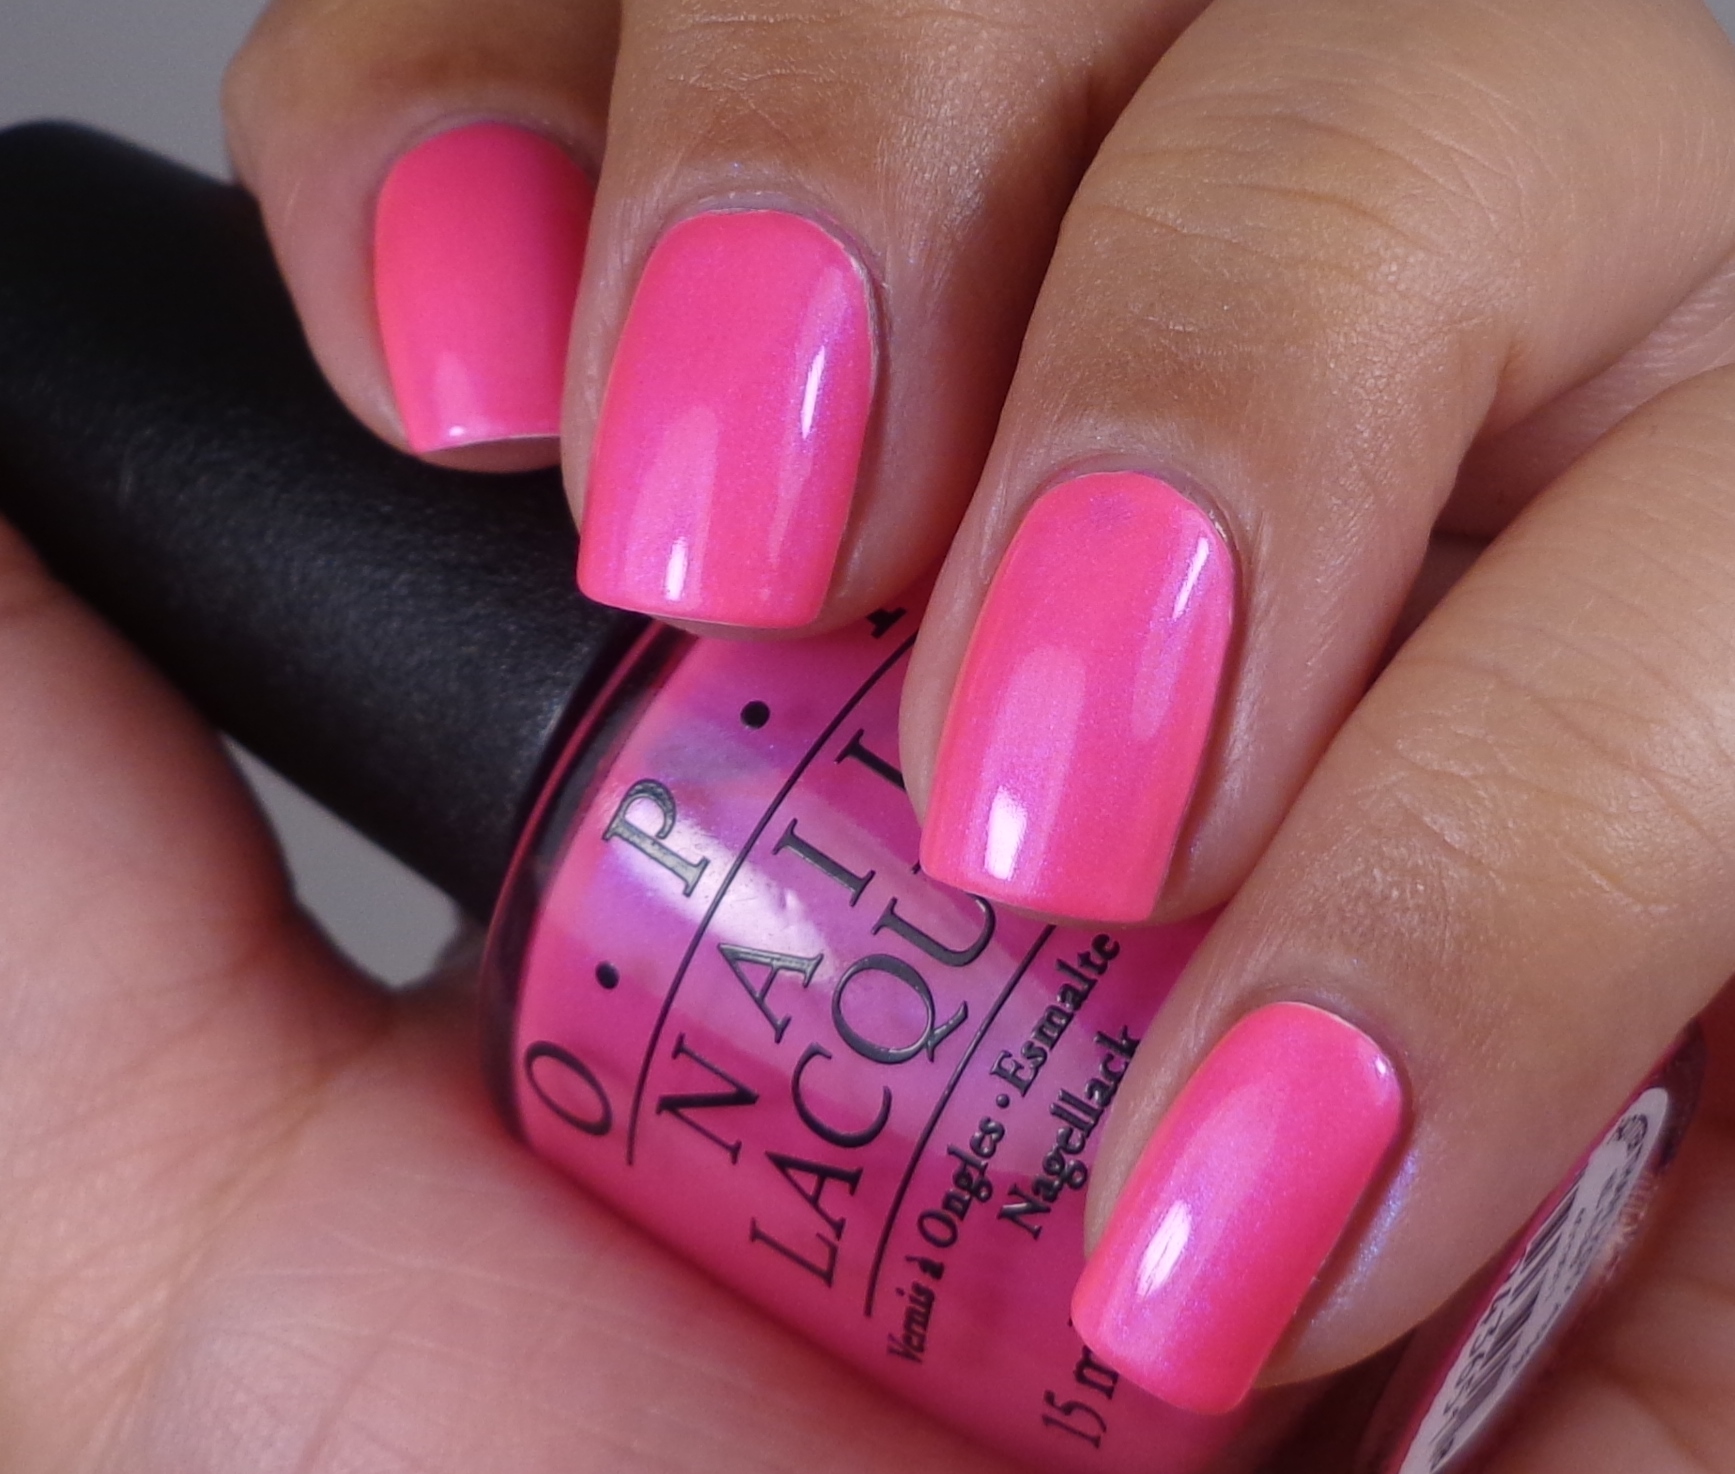 OPI Hotter Than You Pink 1